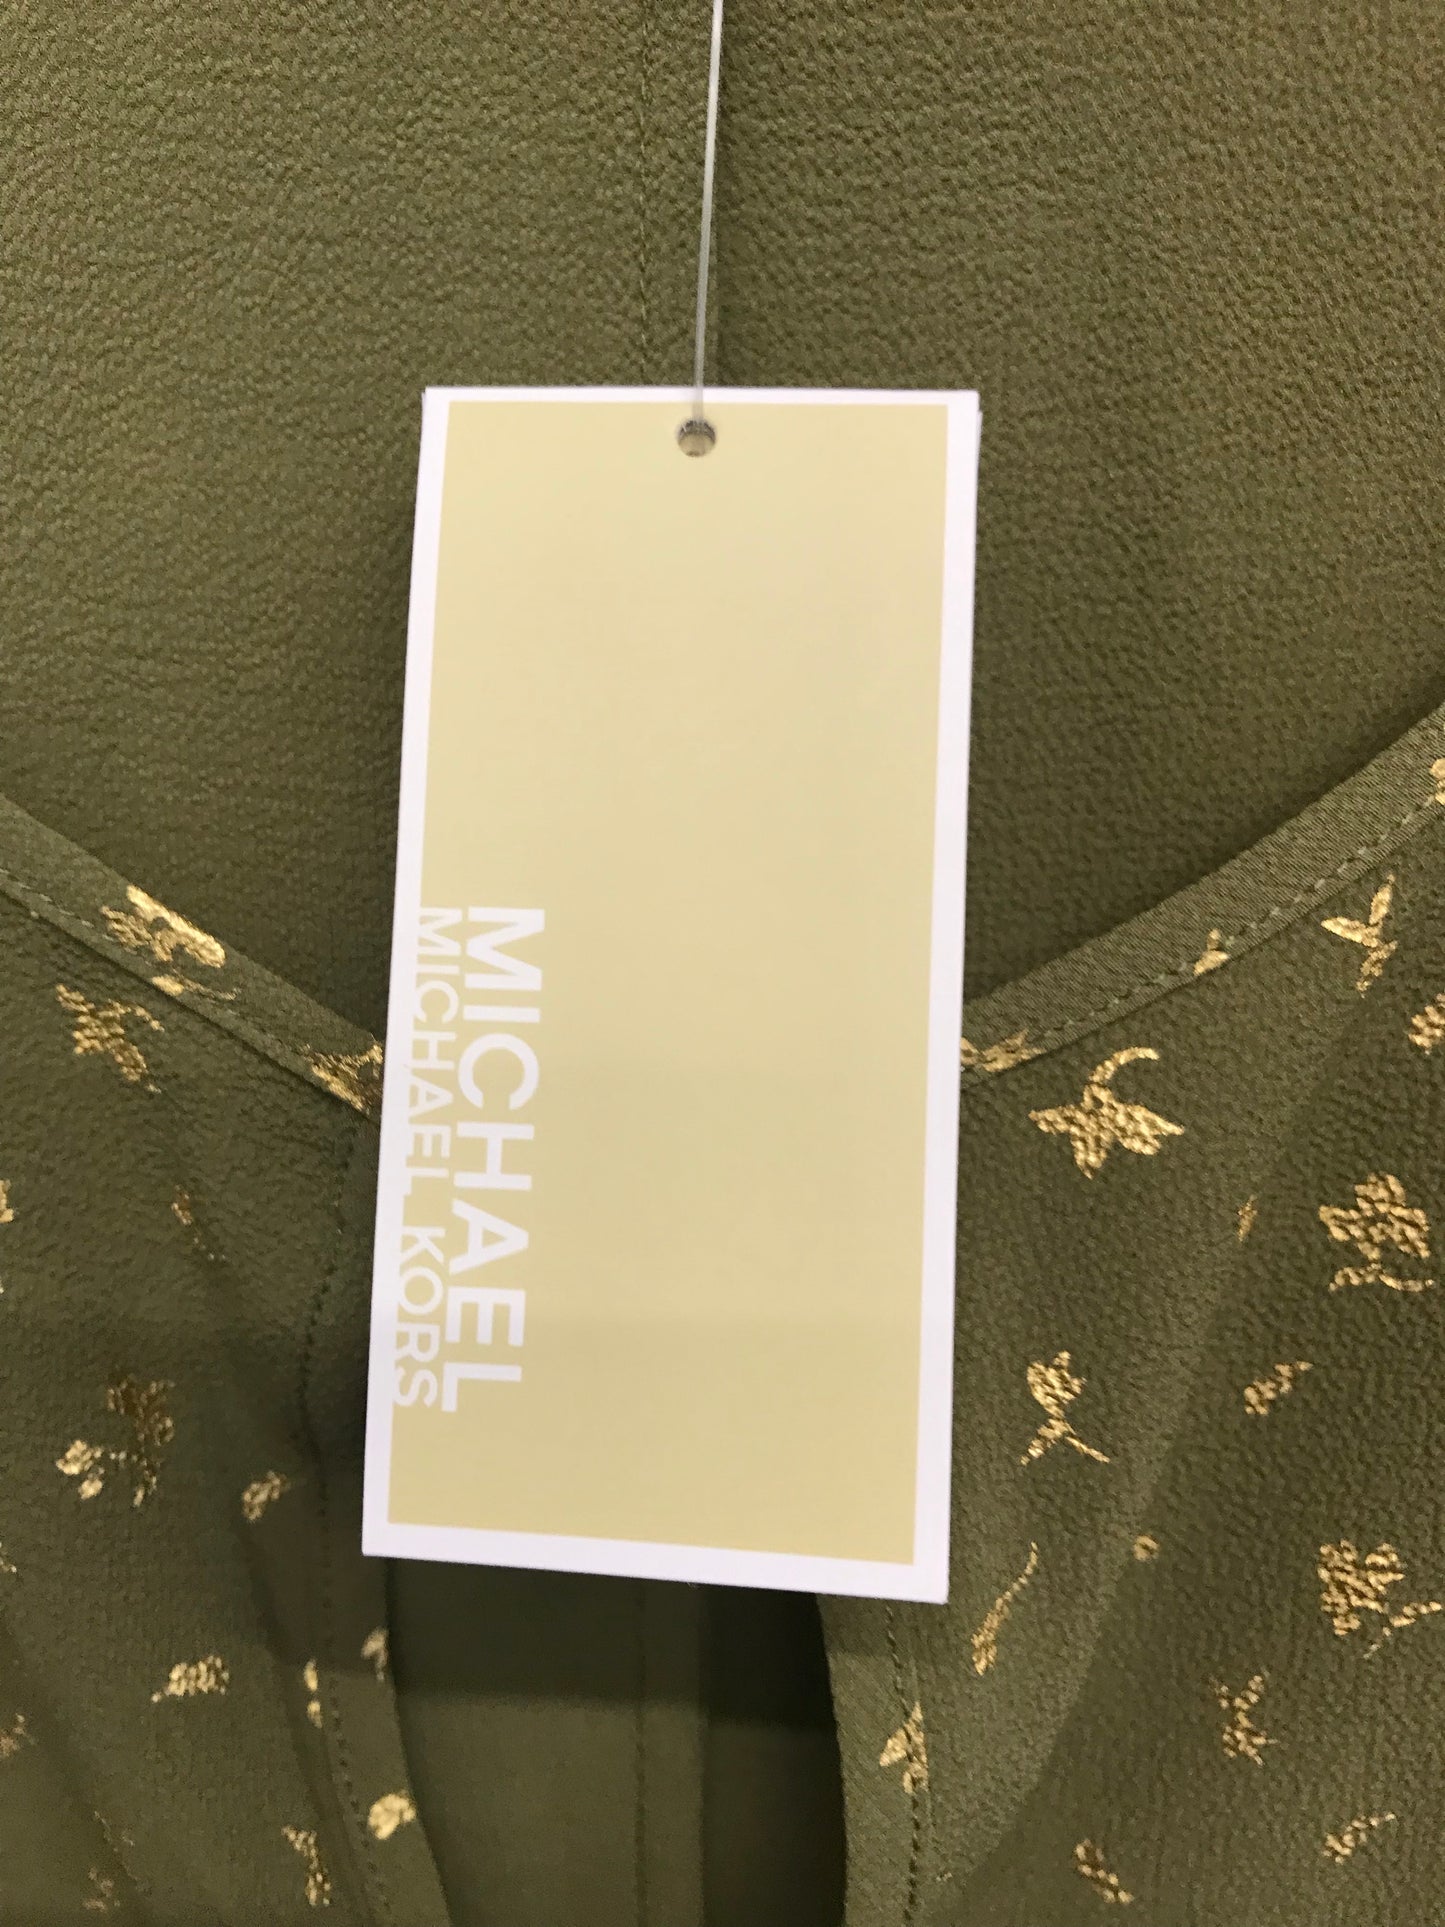 Top Short Sleeve By Michael By Michael Kors  Size: 1x